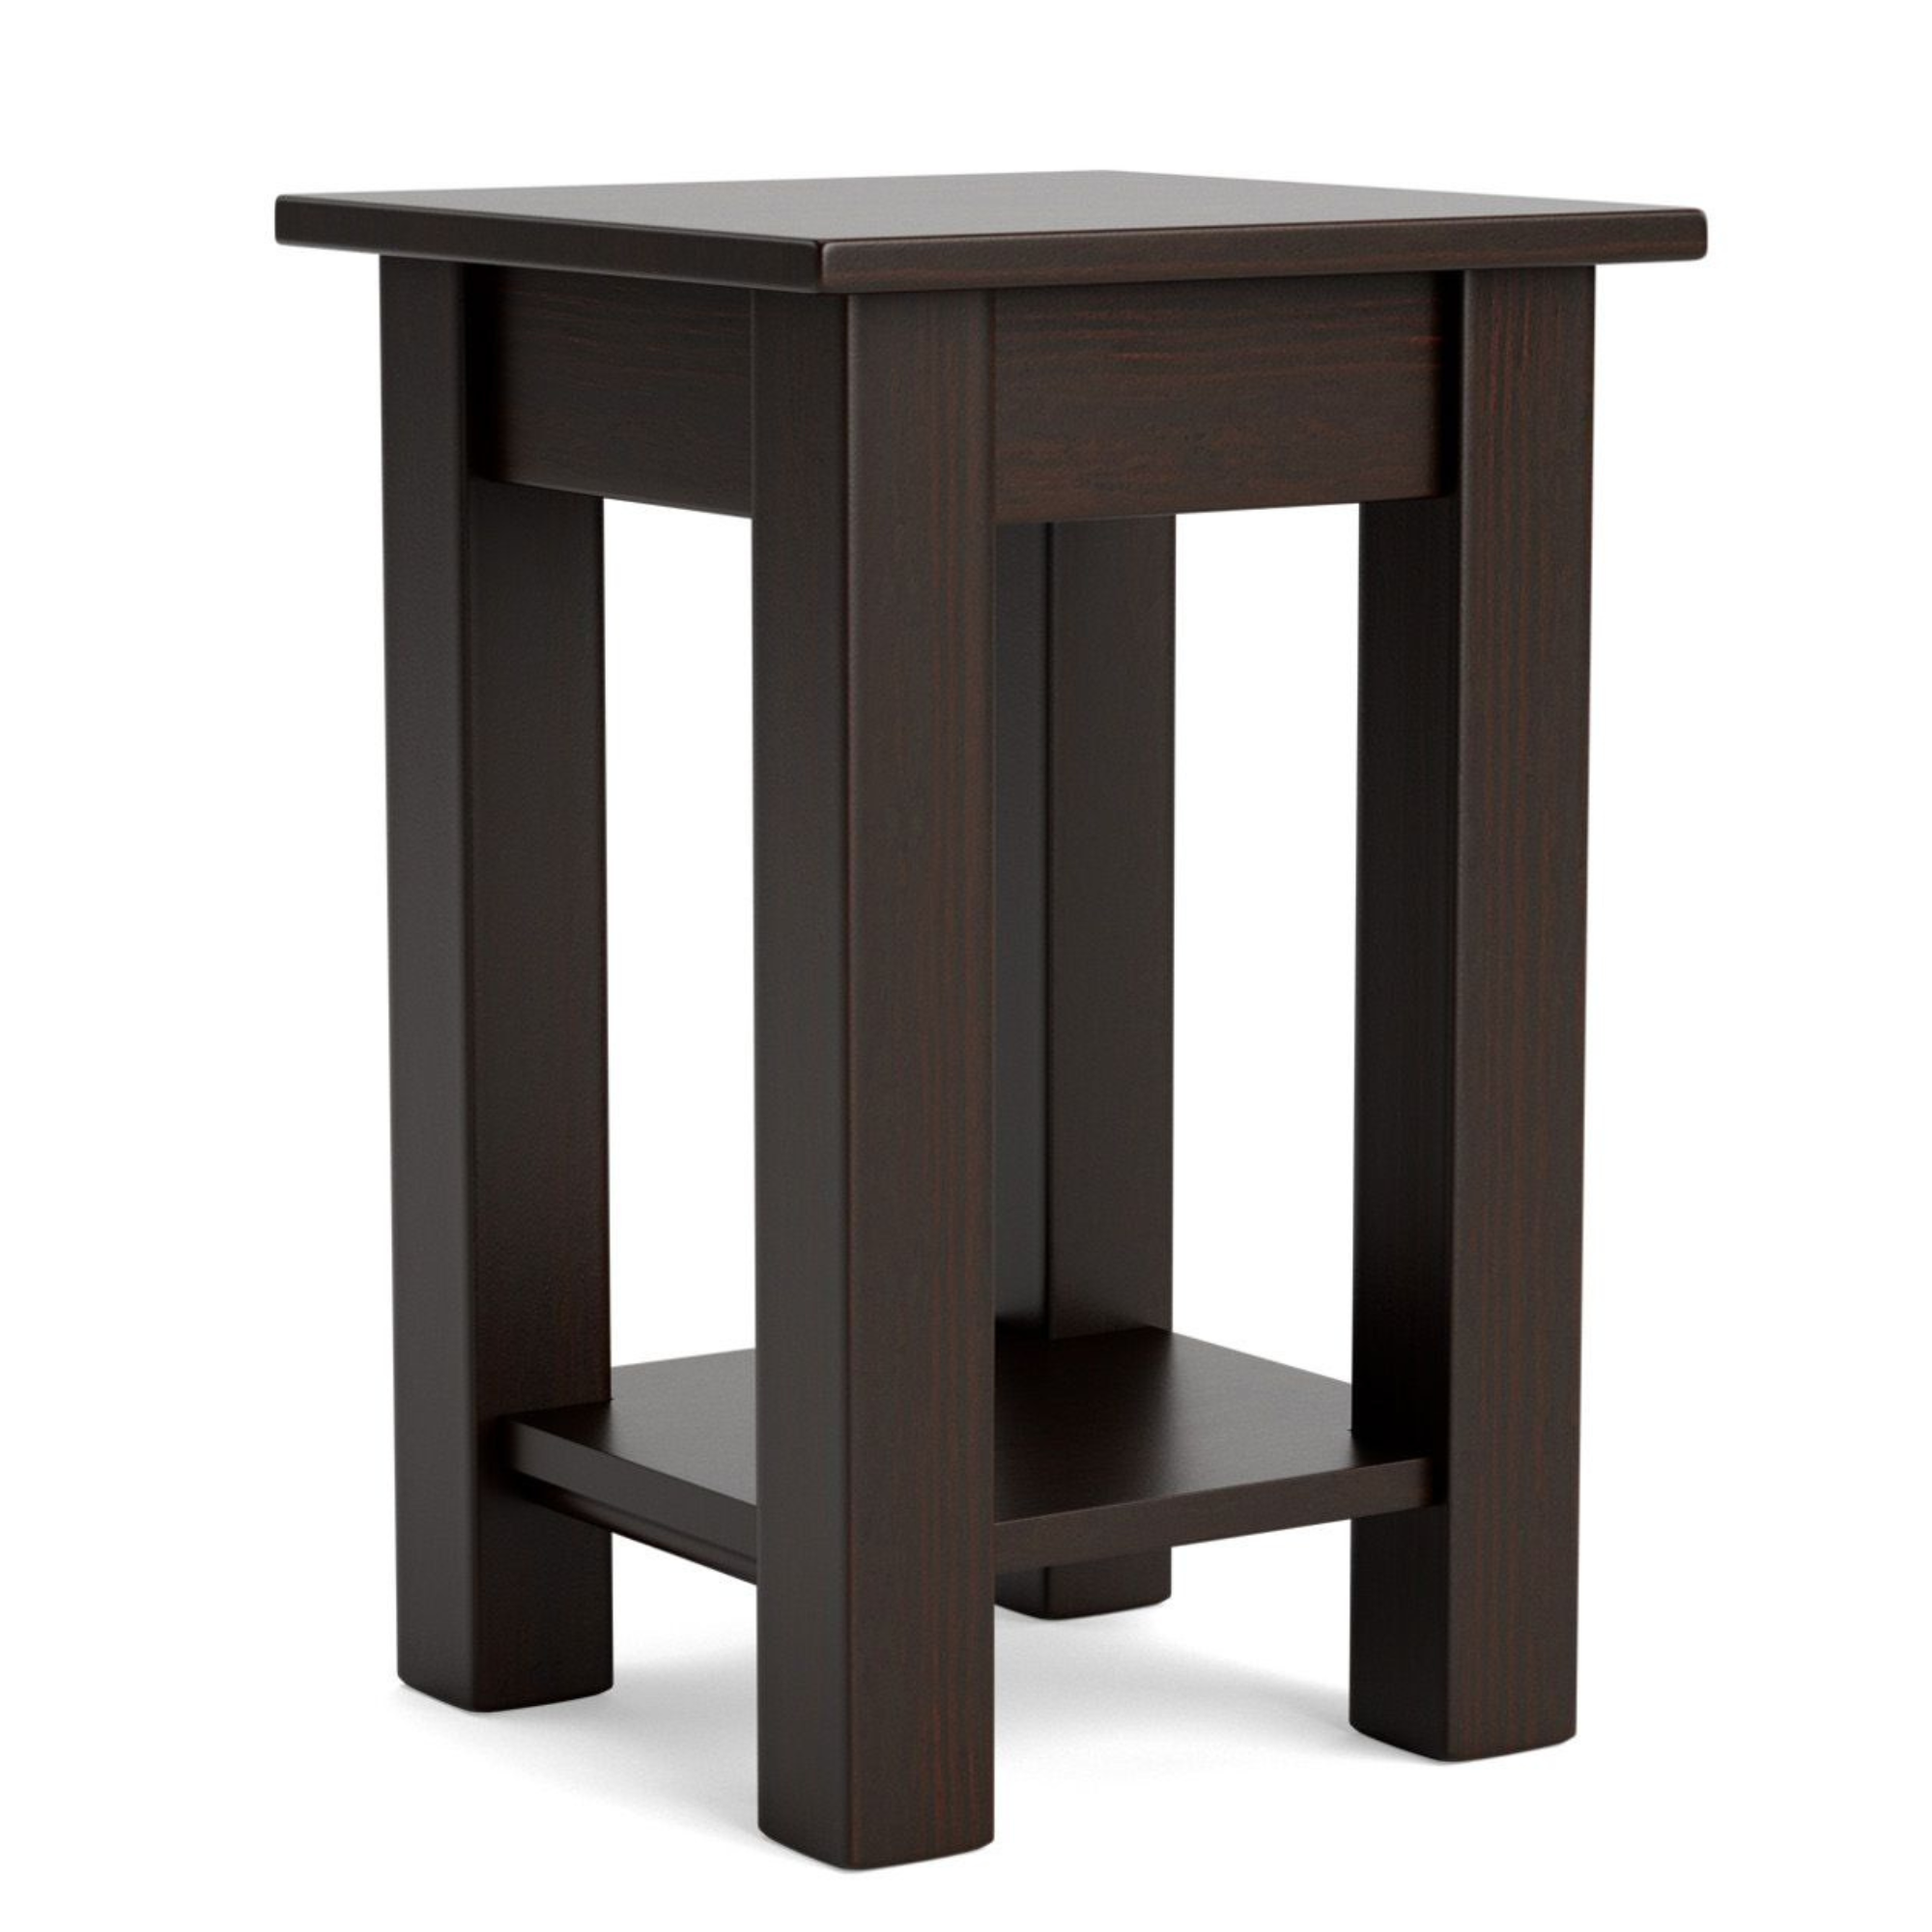 CHARLTON SIDE TABLE | END TABLE | NZ MADE